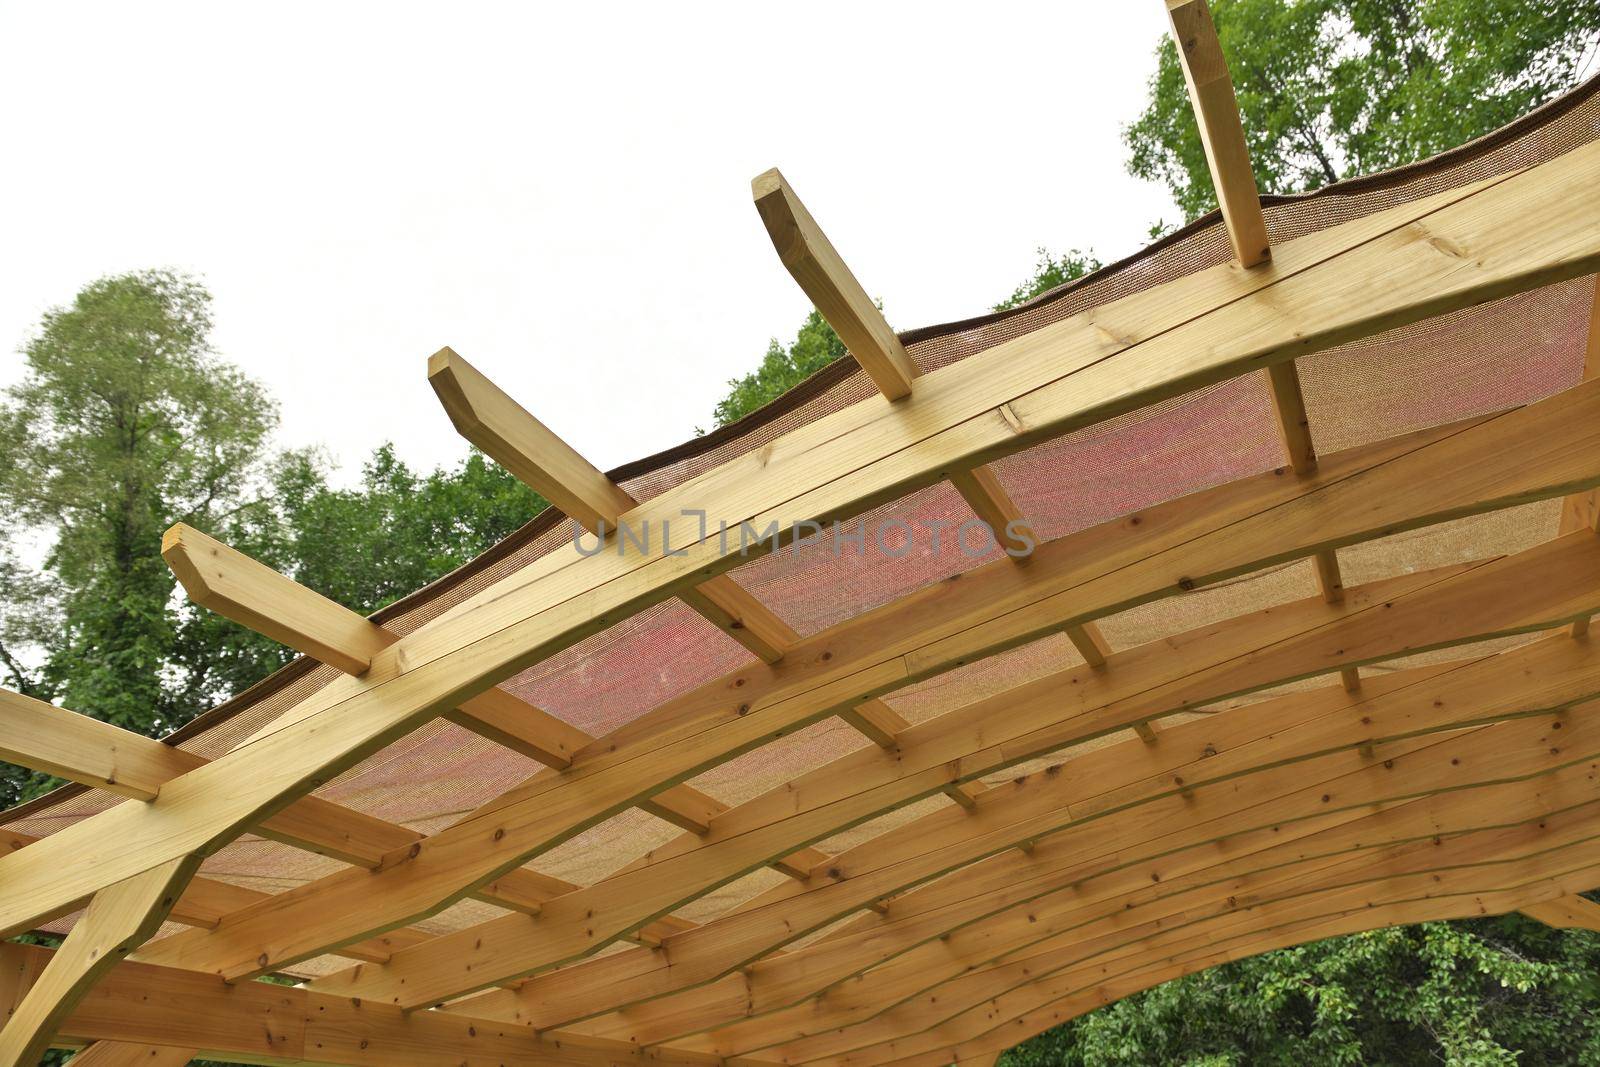 Underside of a Finely Crafted Pergola Roof with Burlap or Canvas Covering to Provide Shade by markvandam